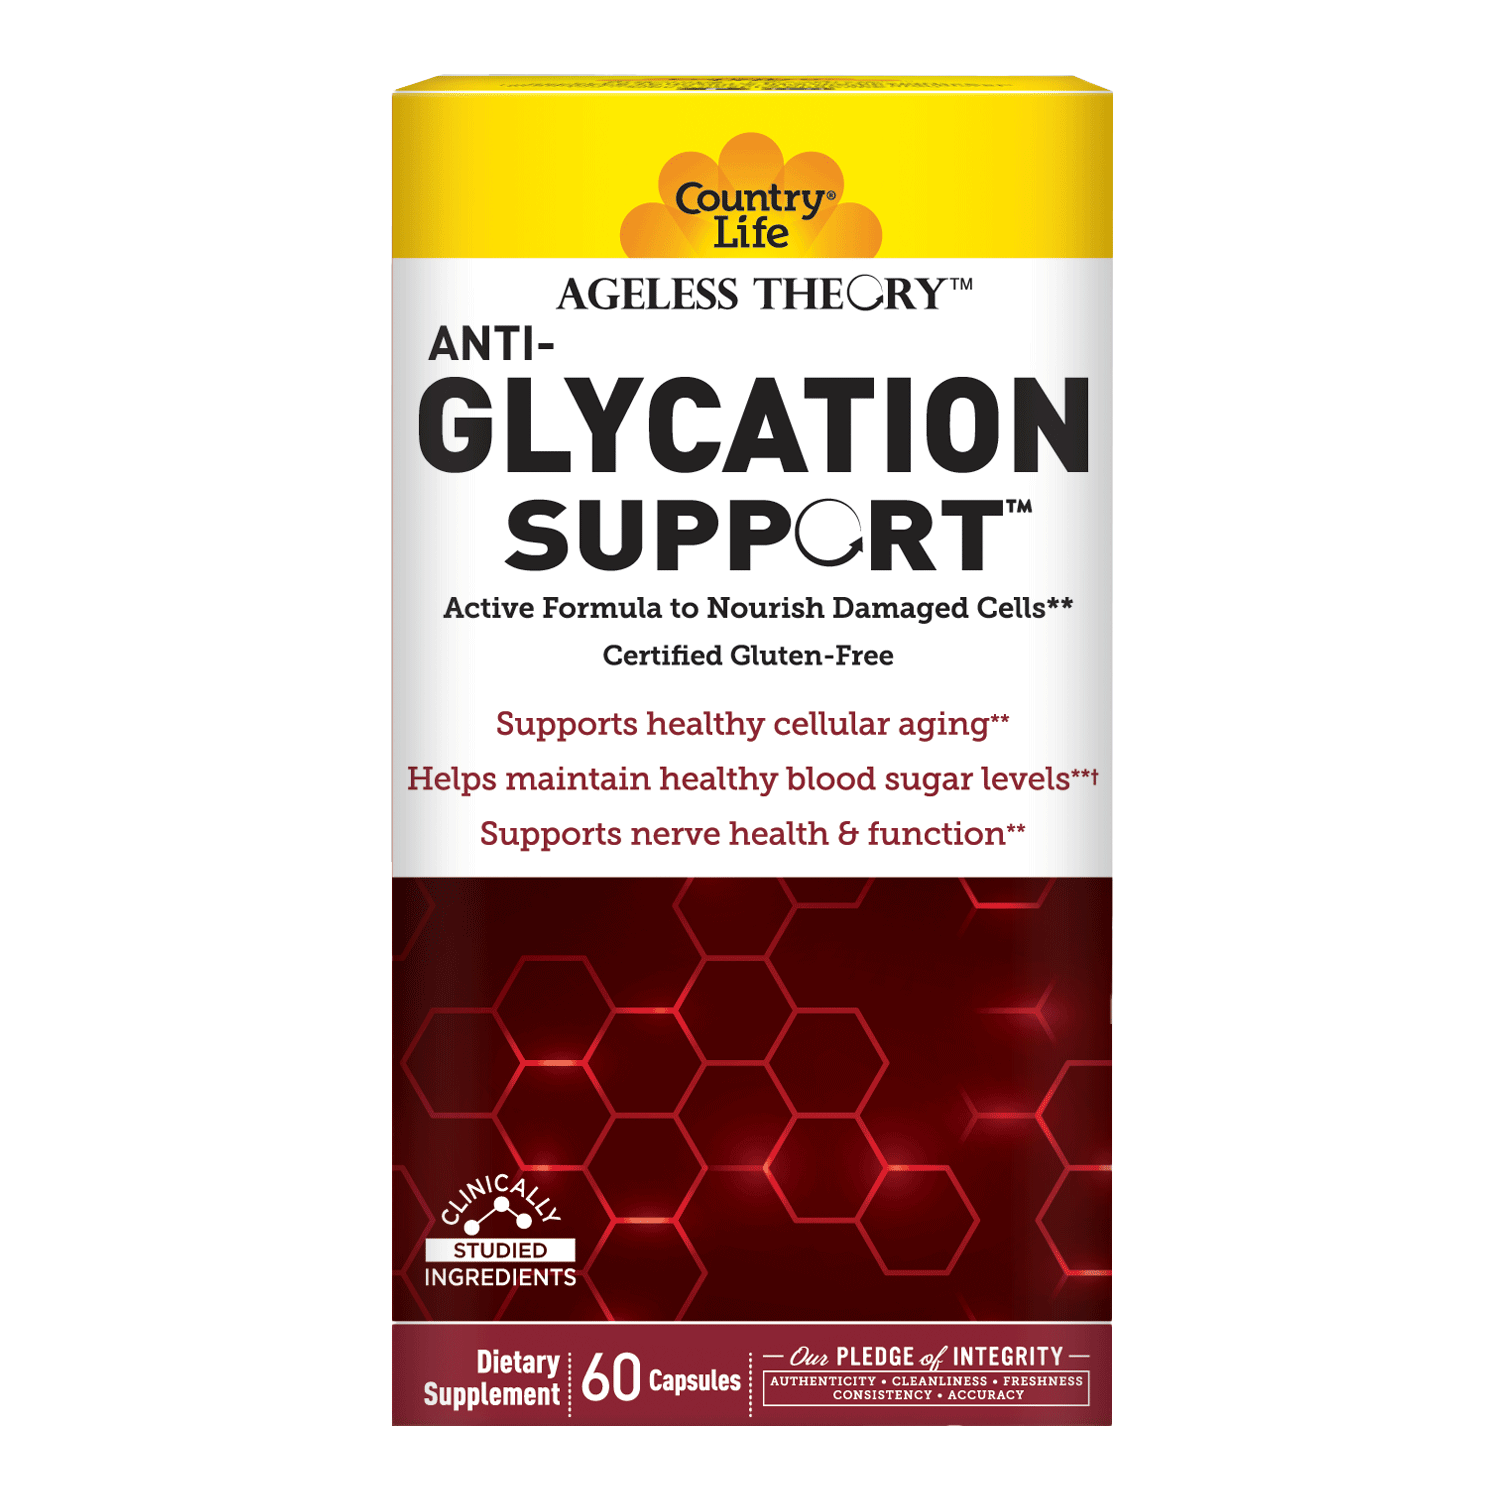 The packaging for the Ageless Theory Antiglycation support product